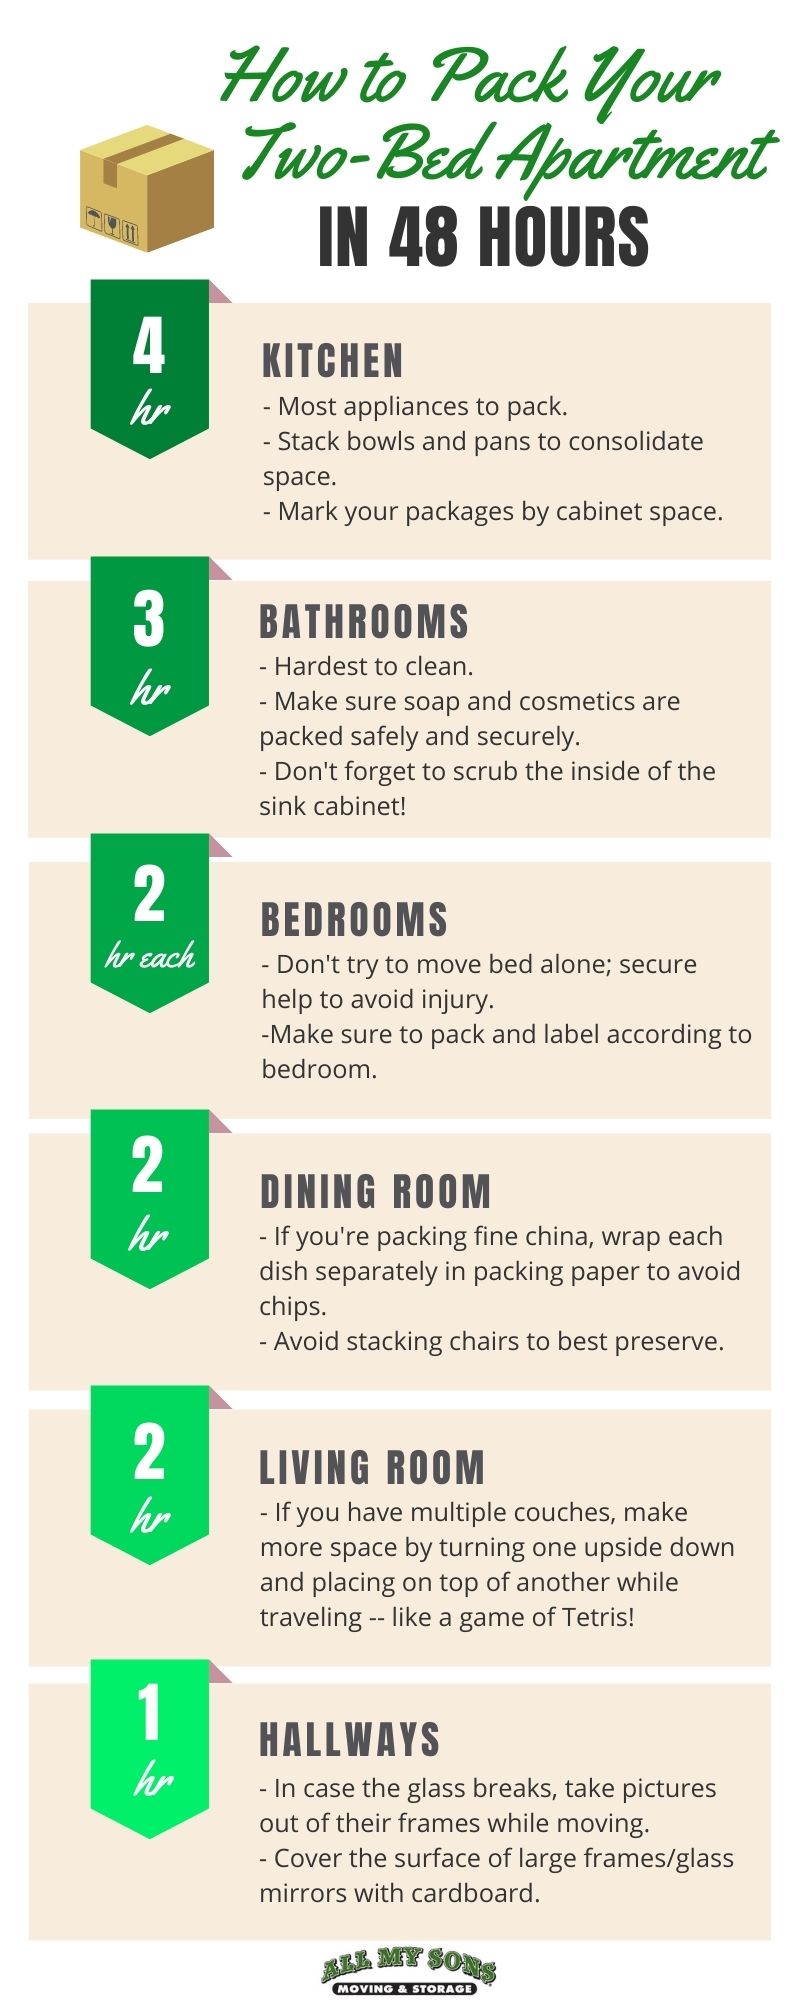 How to Pack Your Two-Bed Apartment infographic